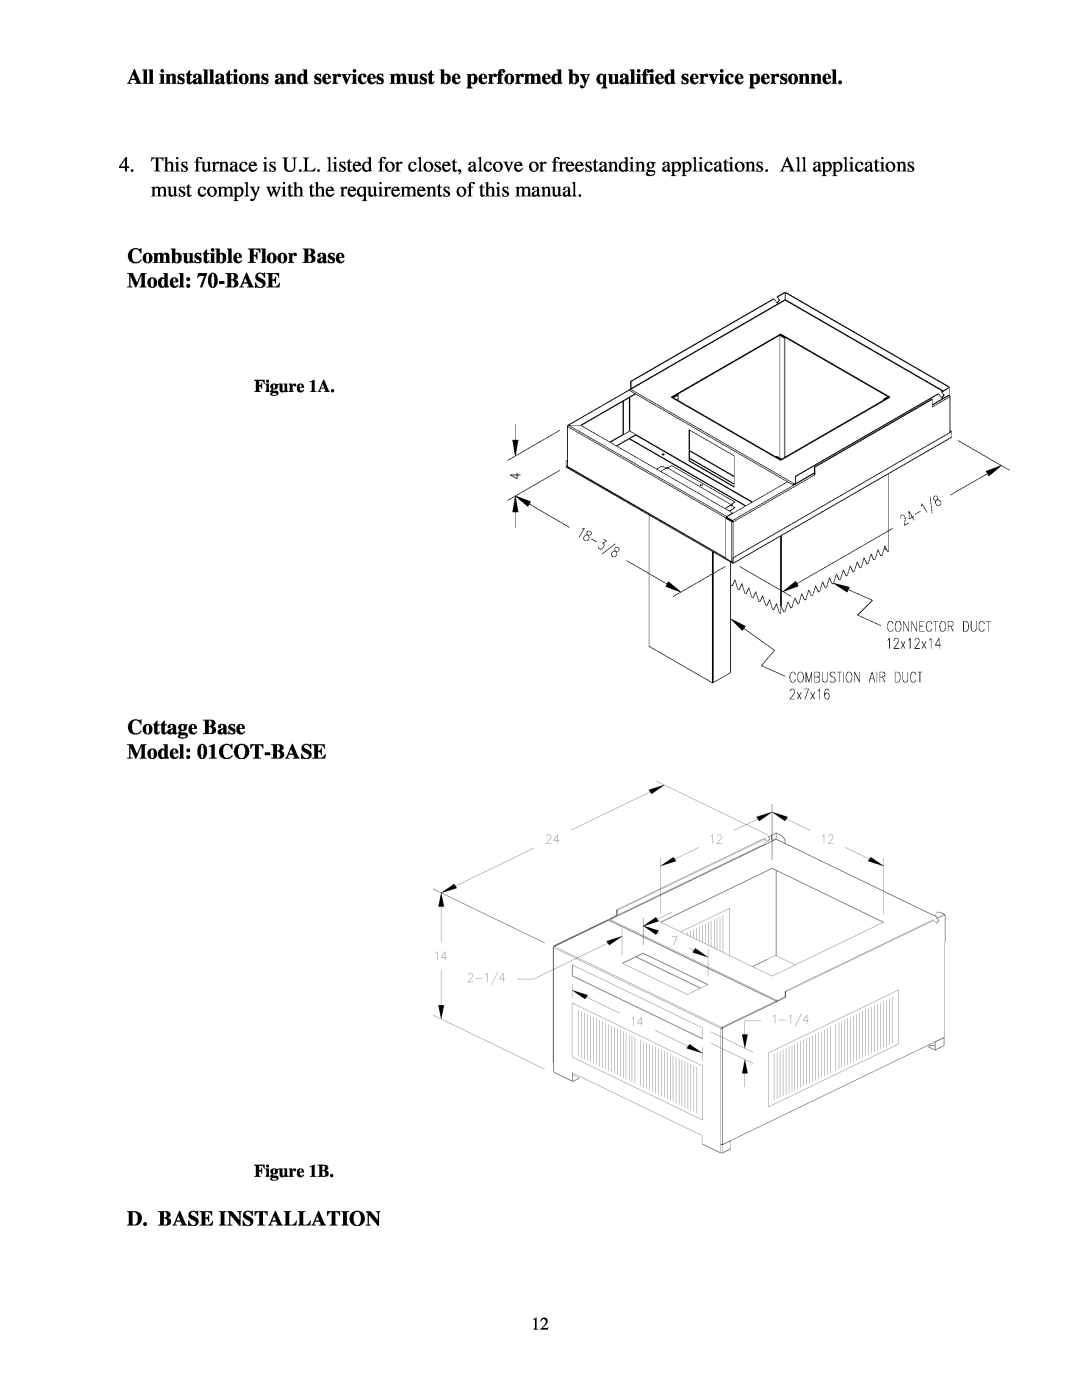 Thermo Products omd-70 Combustible Floor Base Model: 70-BASE, Cottage Base Model: 01COT-BASE, D. Base Installation 